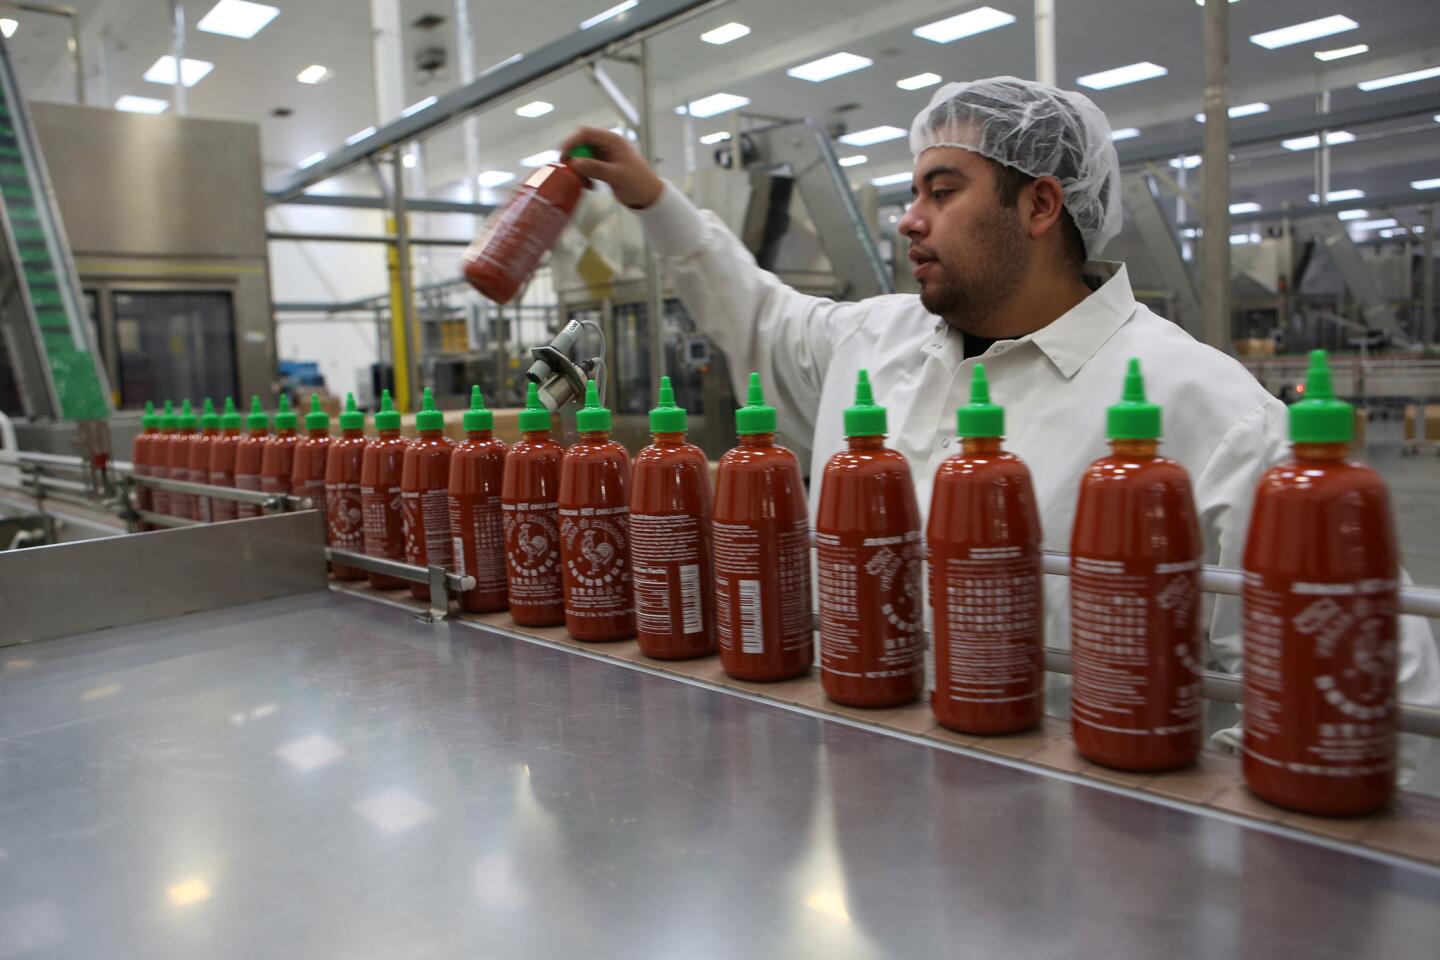 A worker keeps an eye on the production line as freshly filled Sriracha sauce bottles move on a conveyor for packaging at Huy Fong Foods in Irwindale.